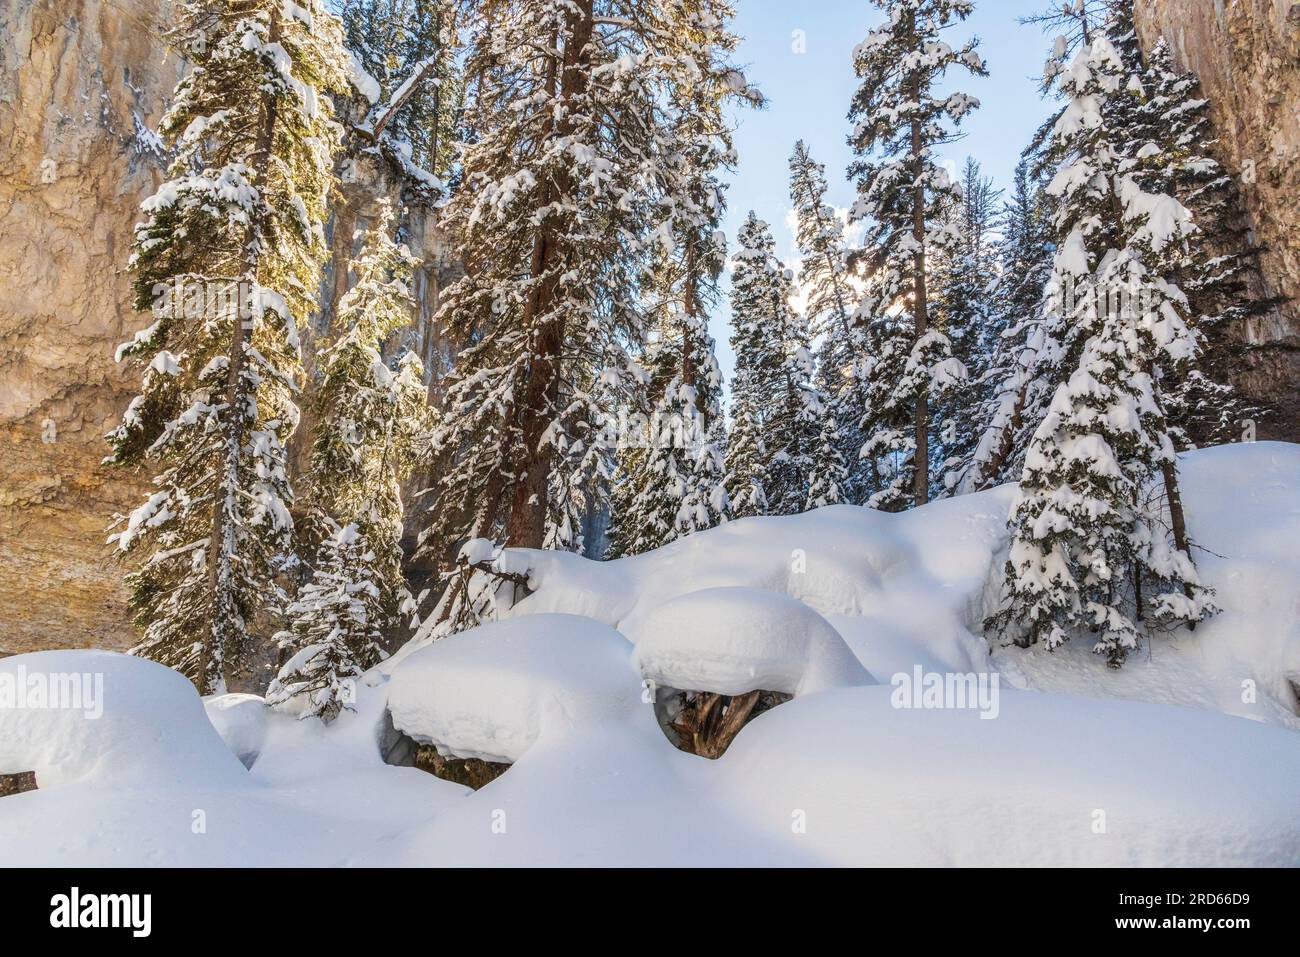 Snowshoeing outing in Lamar Valley in Yelllowstone National Park. Stock Photo